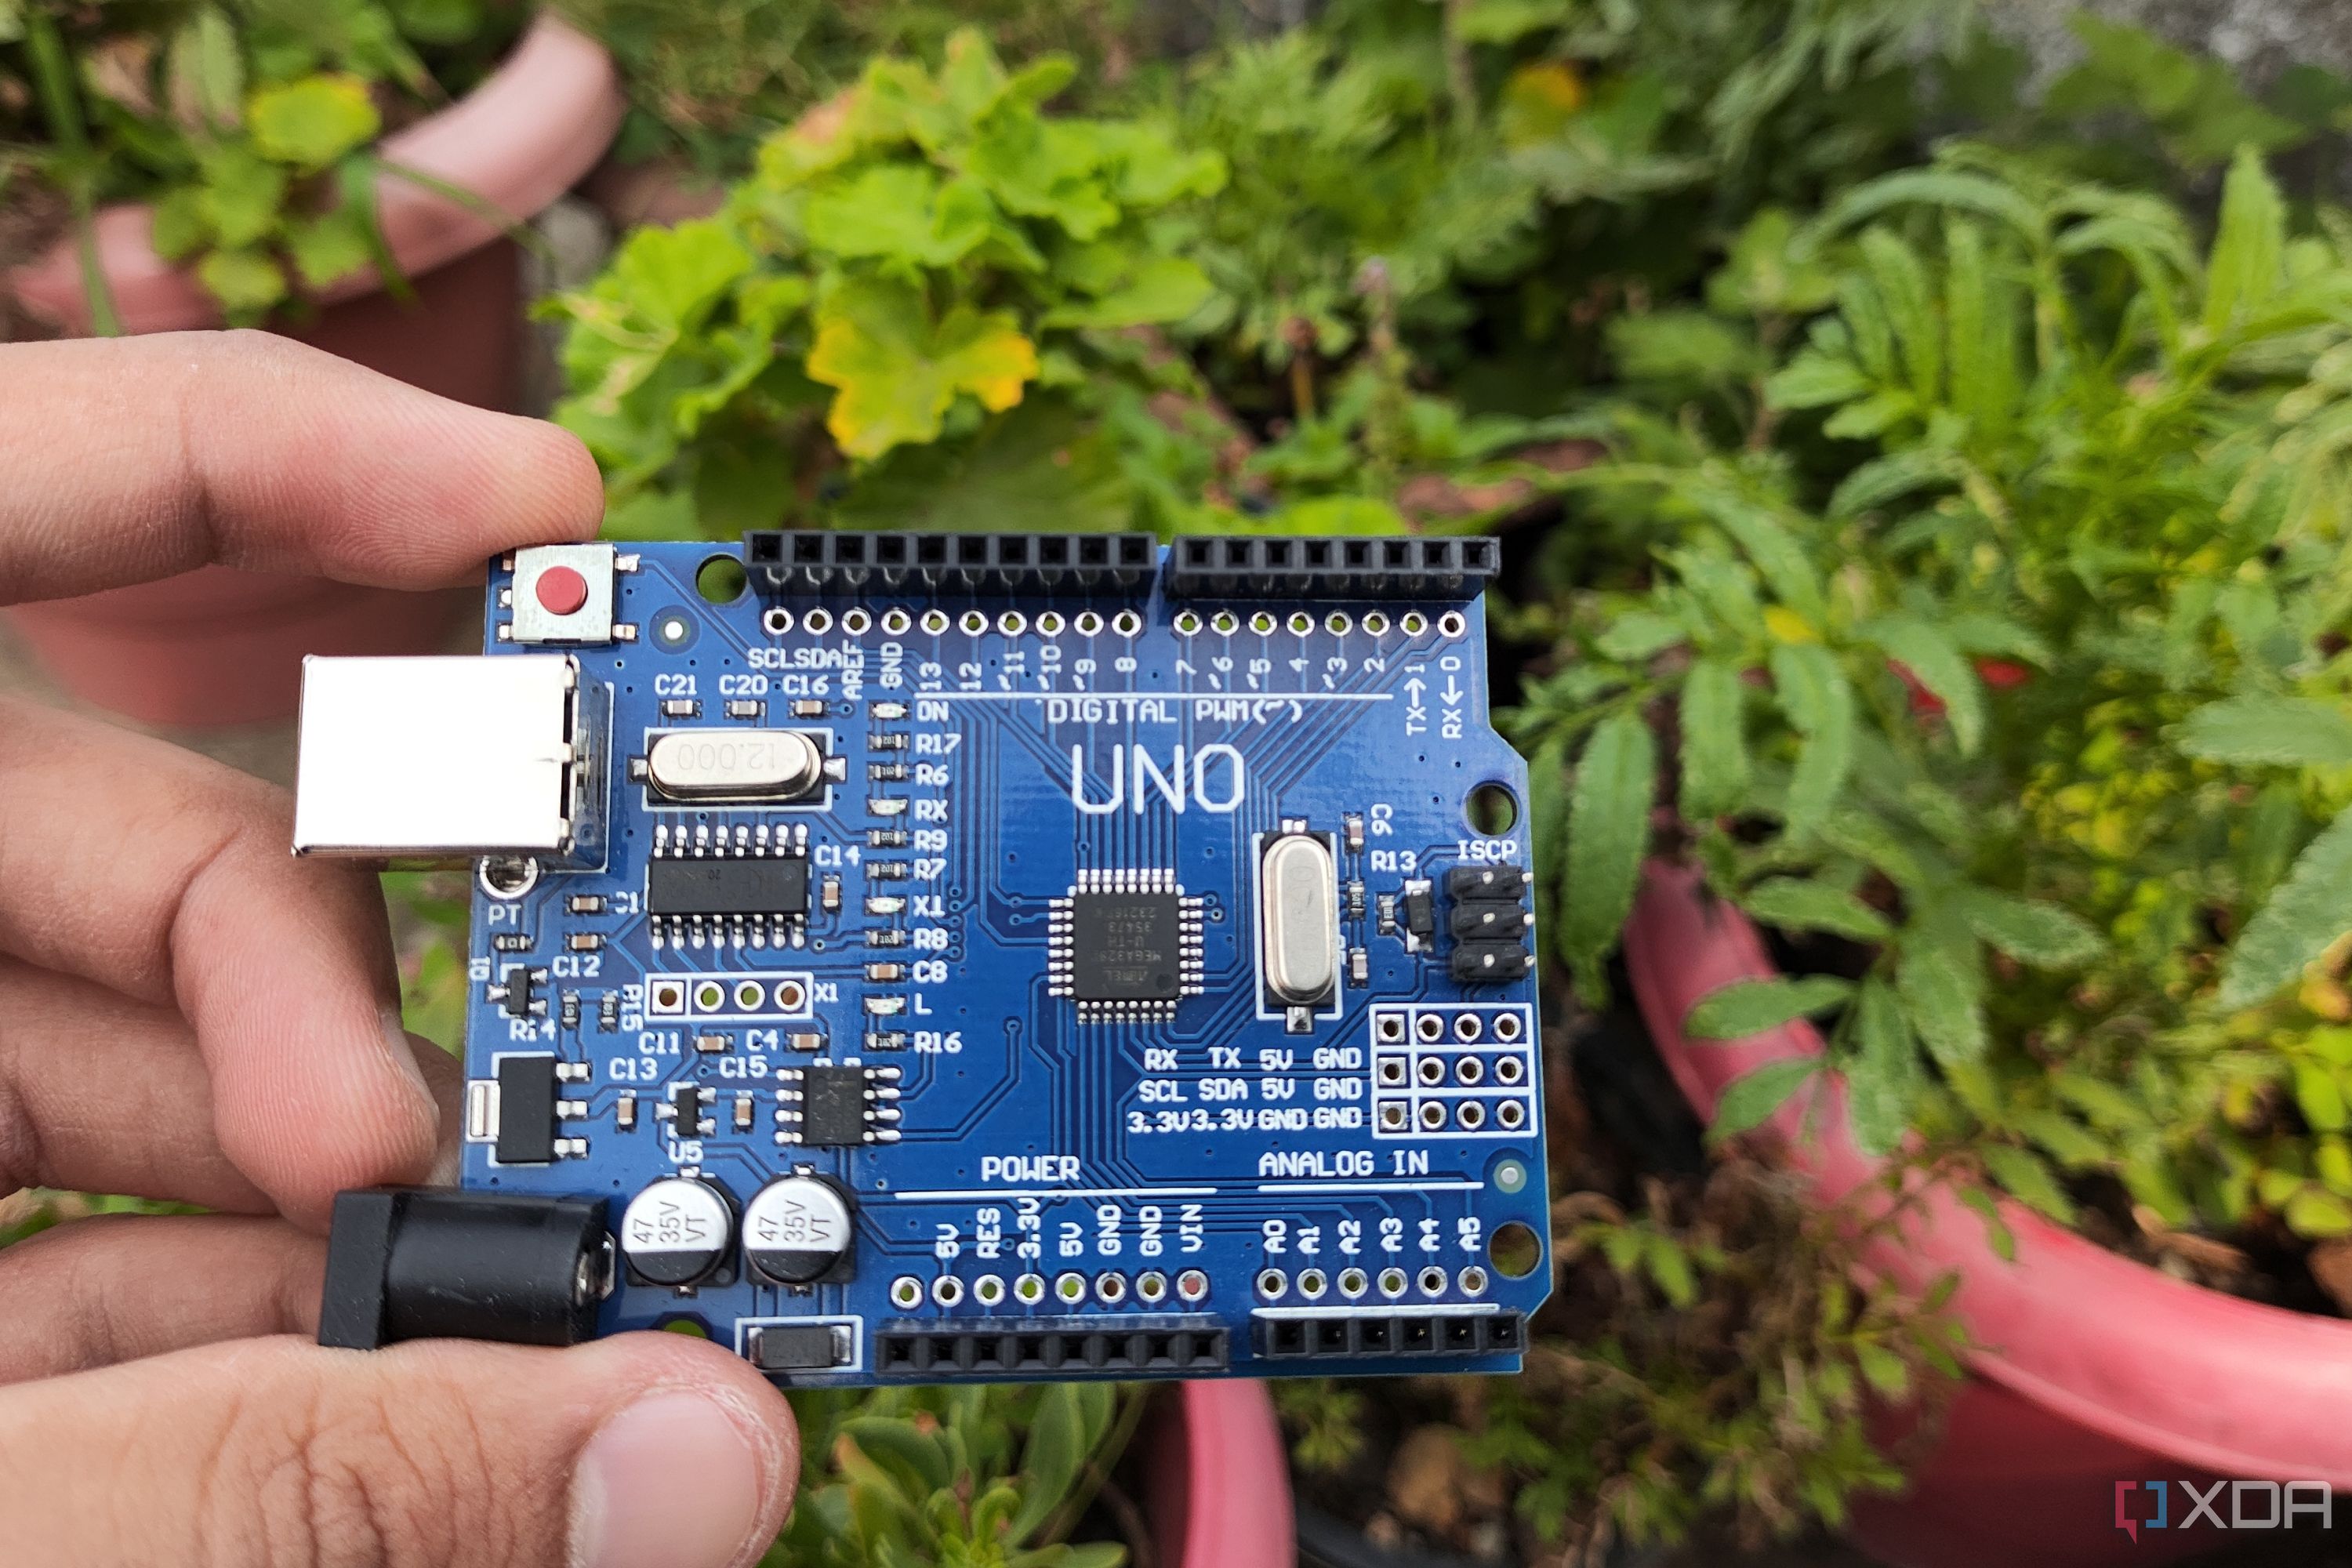 An Arduino board held in front of some plants